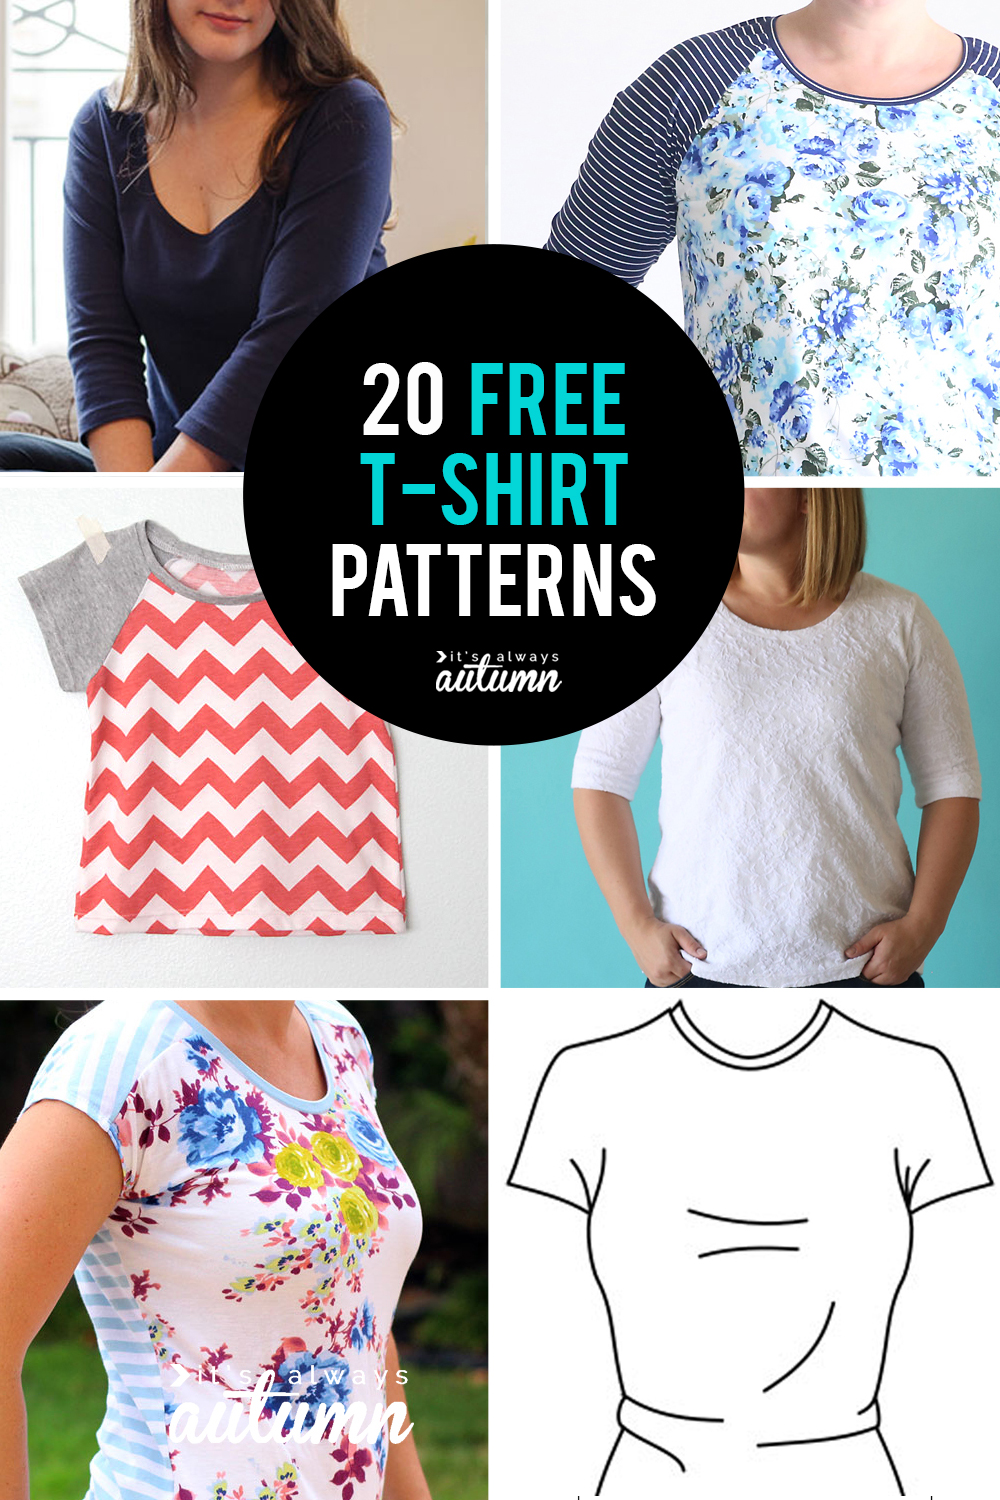 20 free t-shirt patterns in all sizes! Women, children, even one for men.